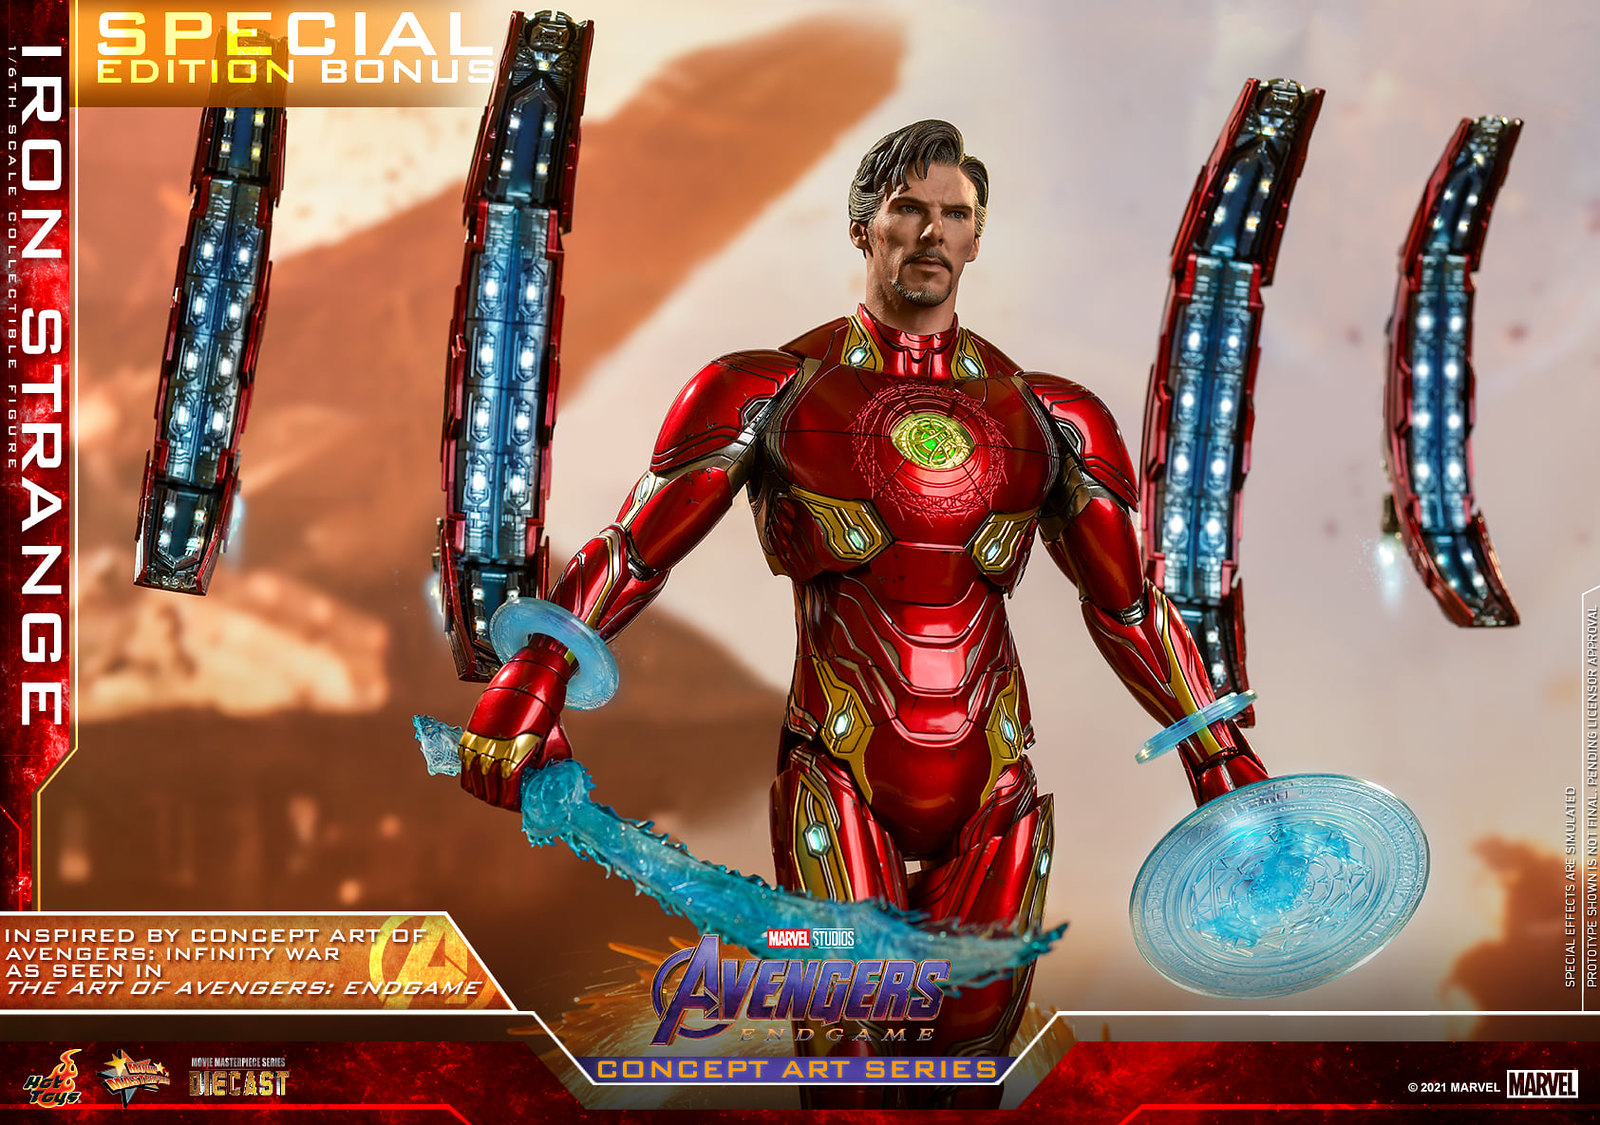 NEW PRODUCT: Hot Toys Avengers: Endgame (Concept Art Series) - 1/6th scale Iron Strange Collectible Figure 51311951954_f707d28285_h